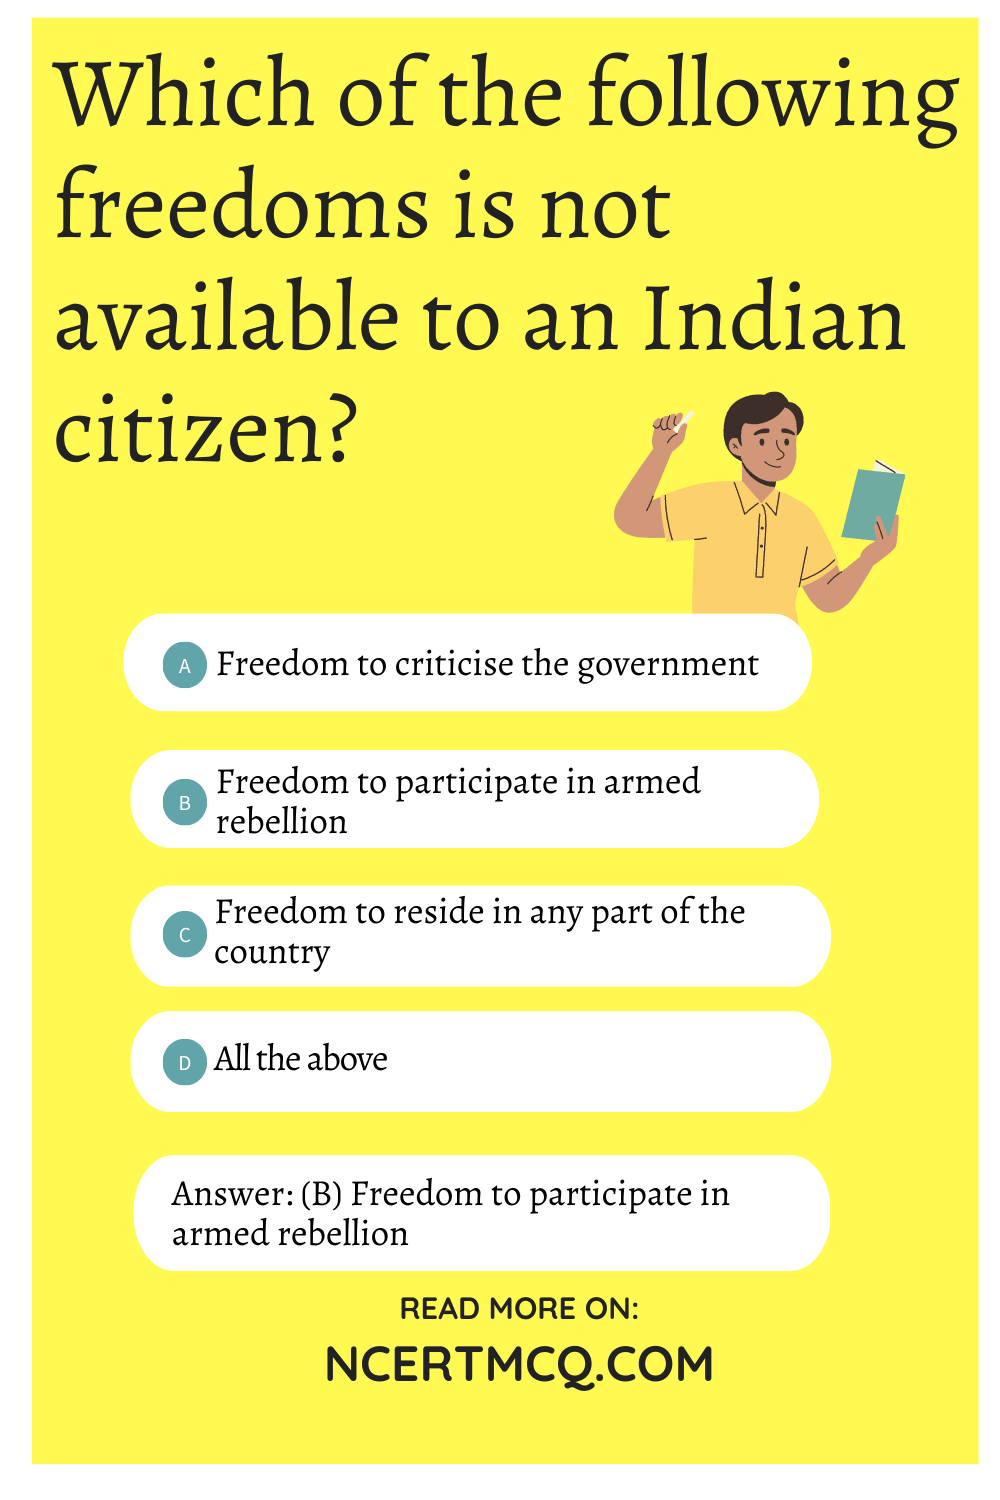 Which of the following freedoms is not available to an Indian citizen?